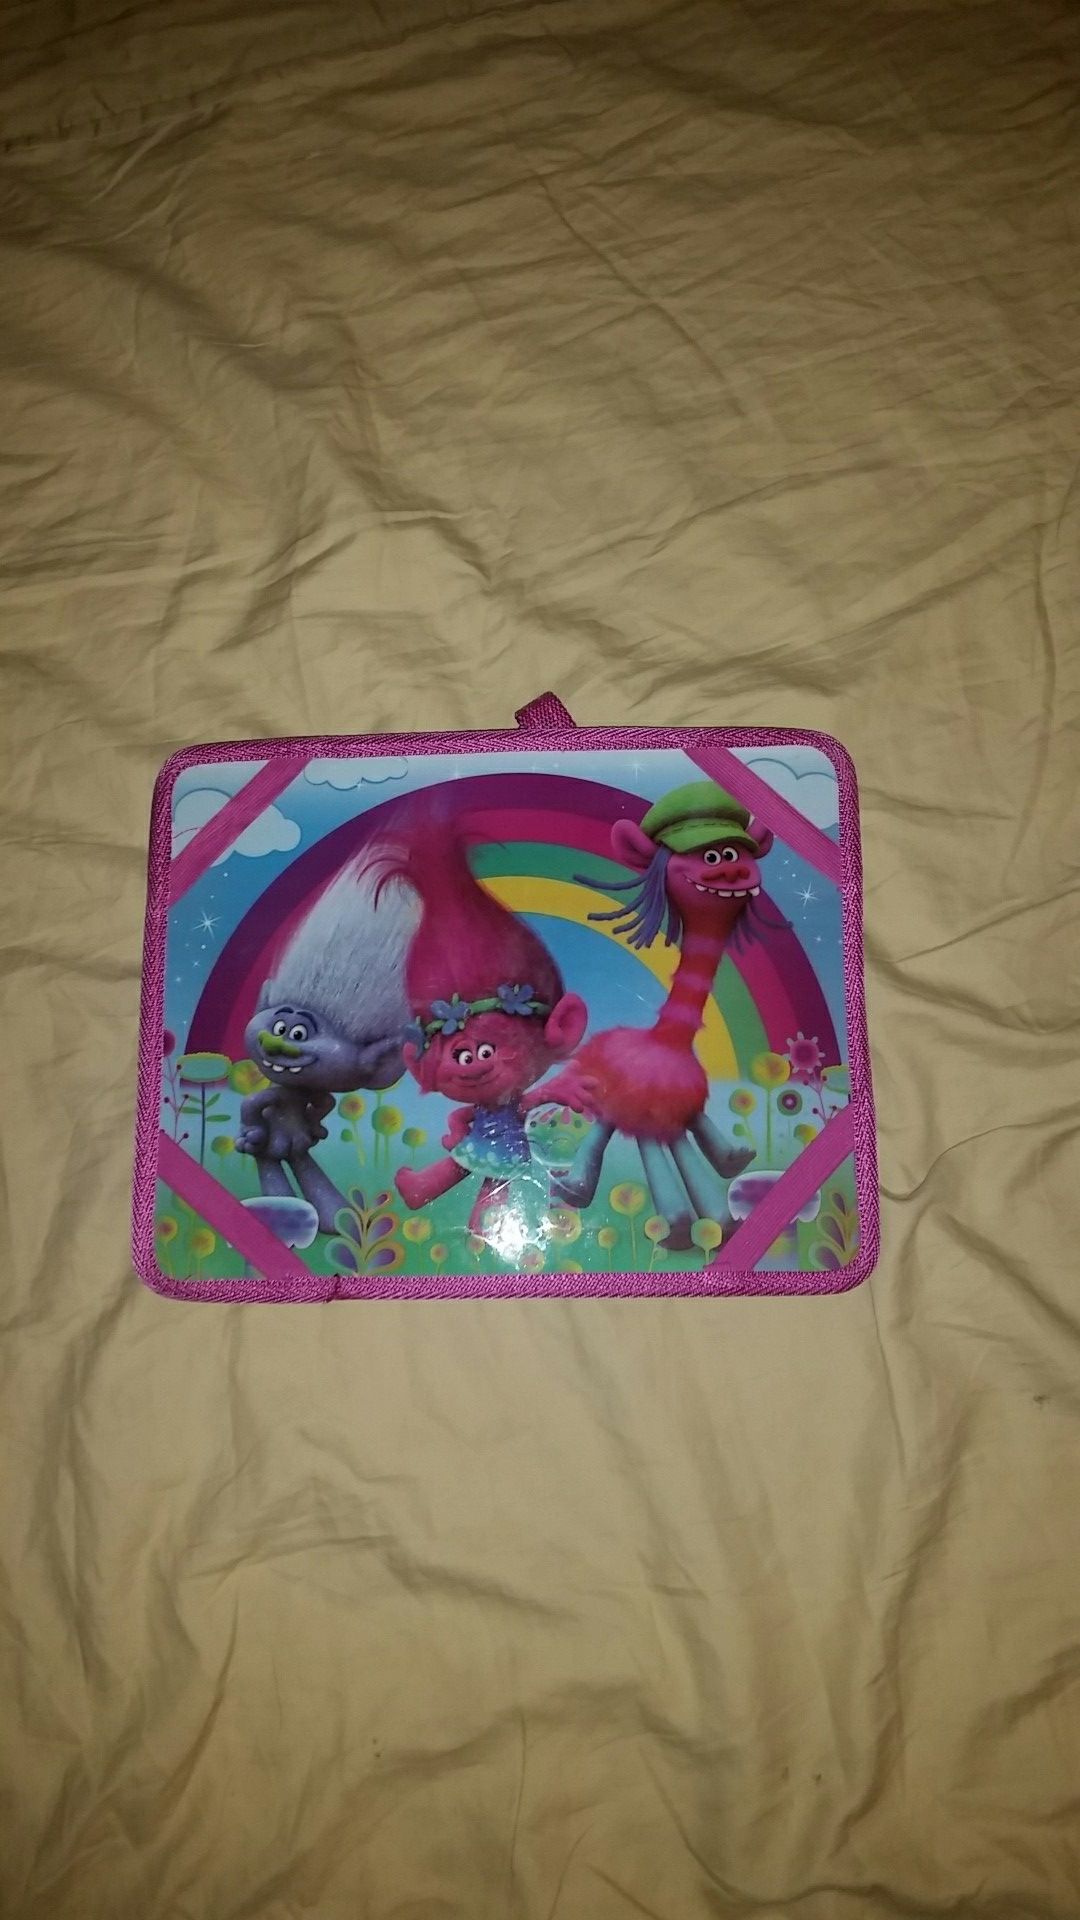 Trolls portable tray for kids